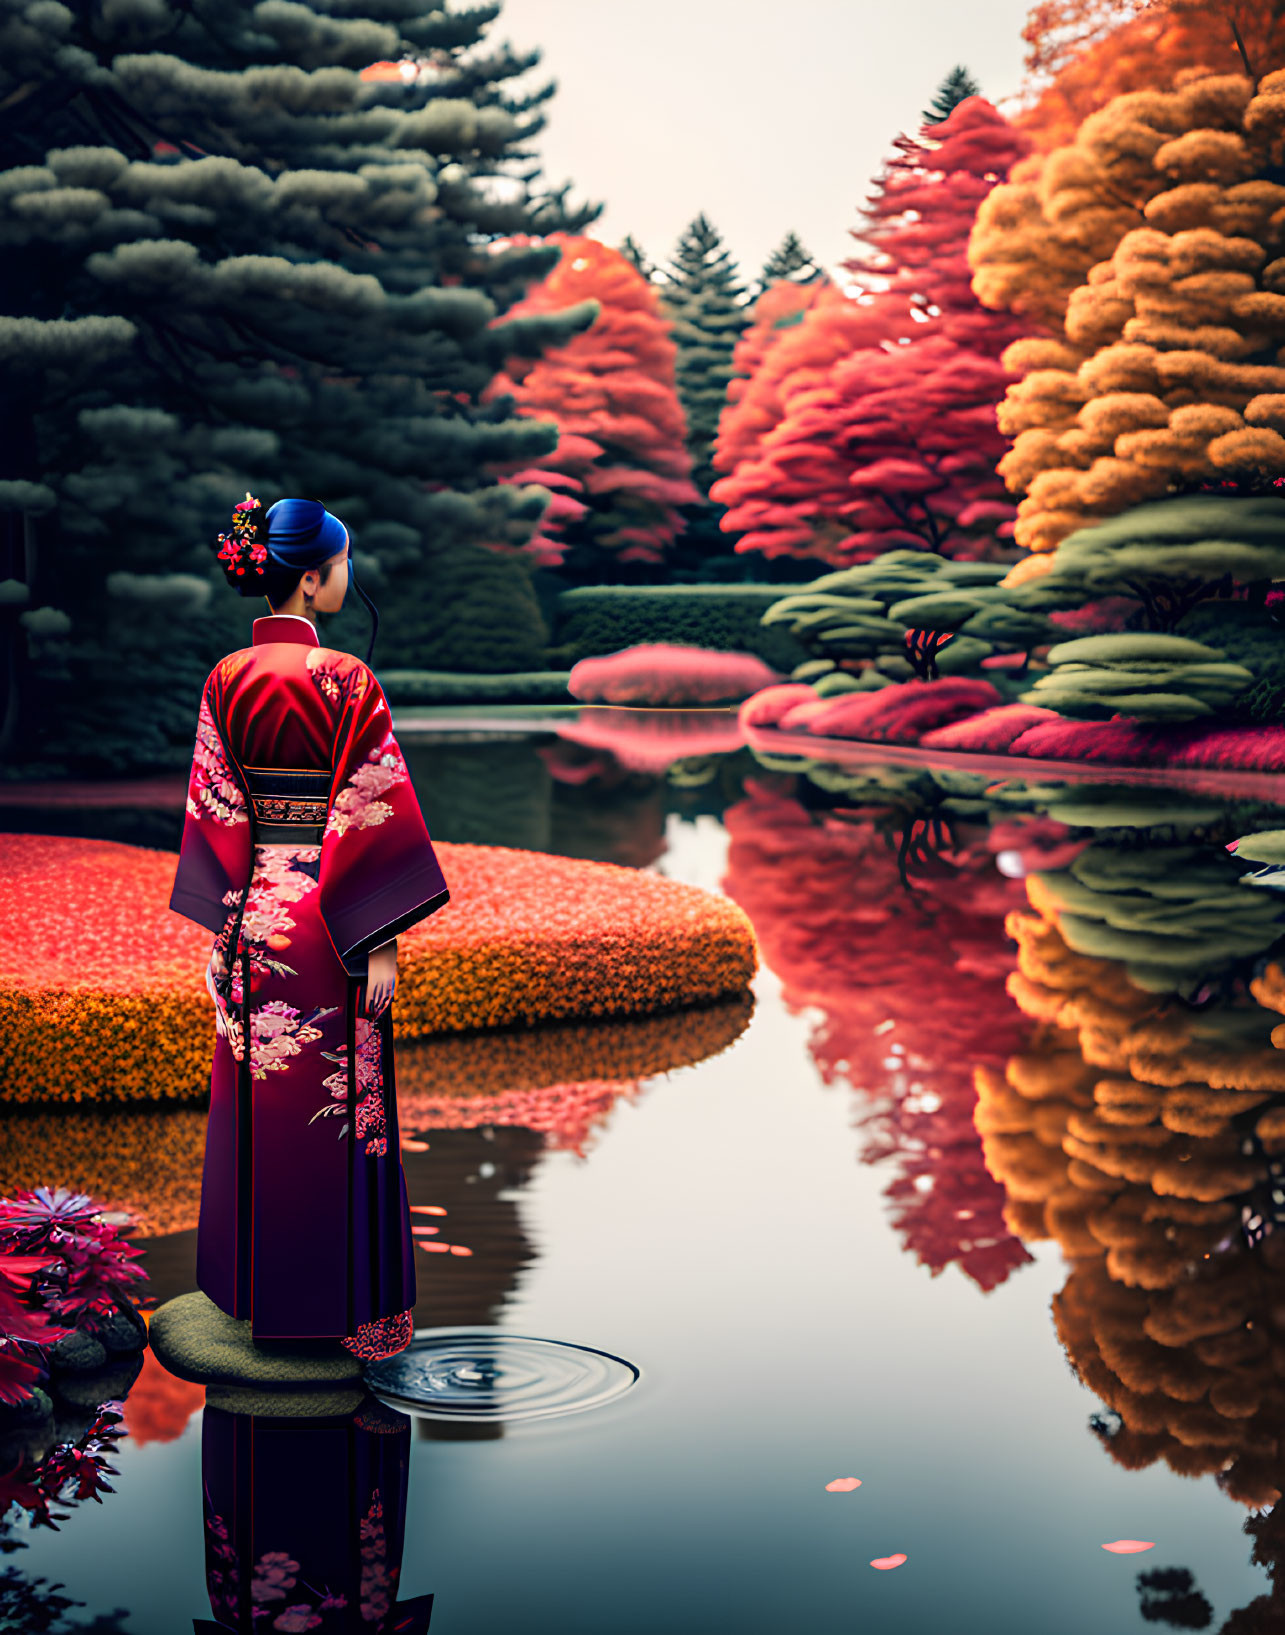 Person in red kimono by serene pond with autumn foliage.